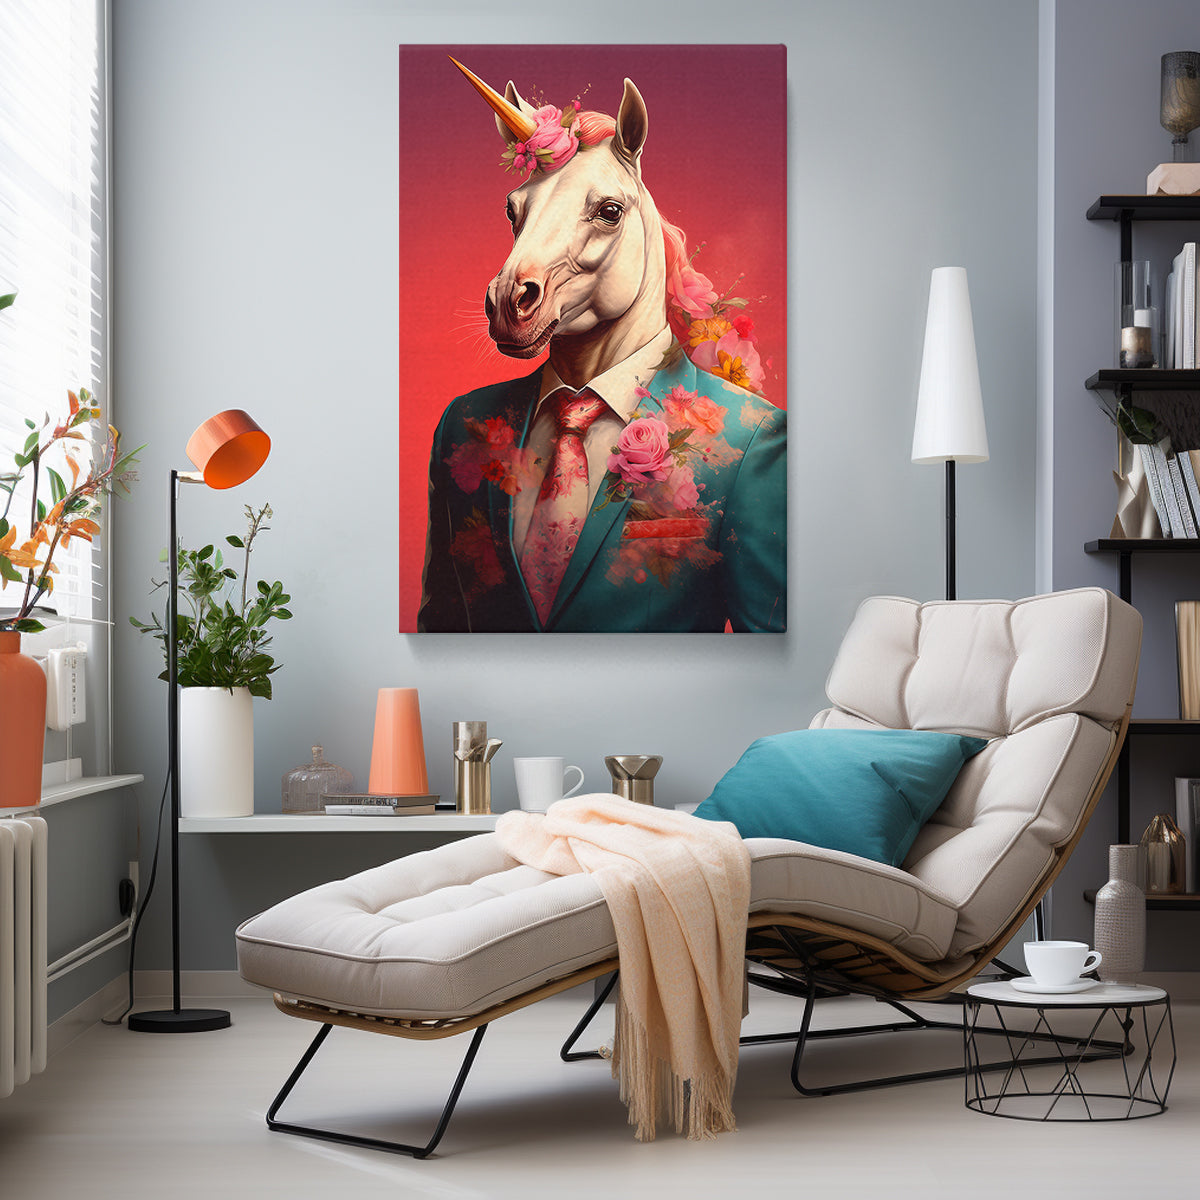 Unicorn in Floral Suit, Charming Gift for Unicorn Lovers Canvas Prints Artesty 1 Panel 24"x36" 